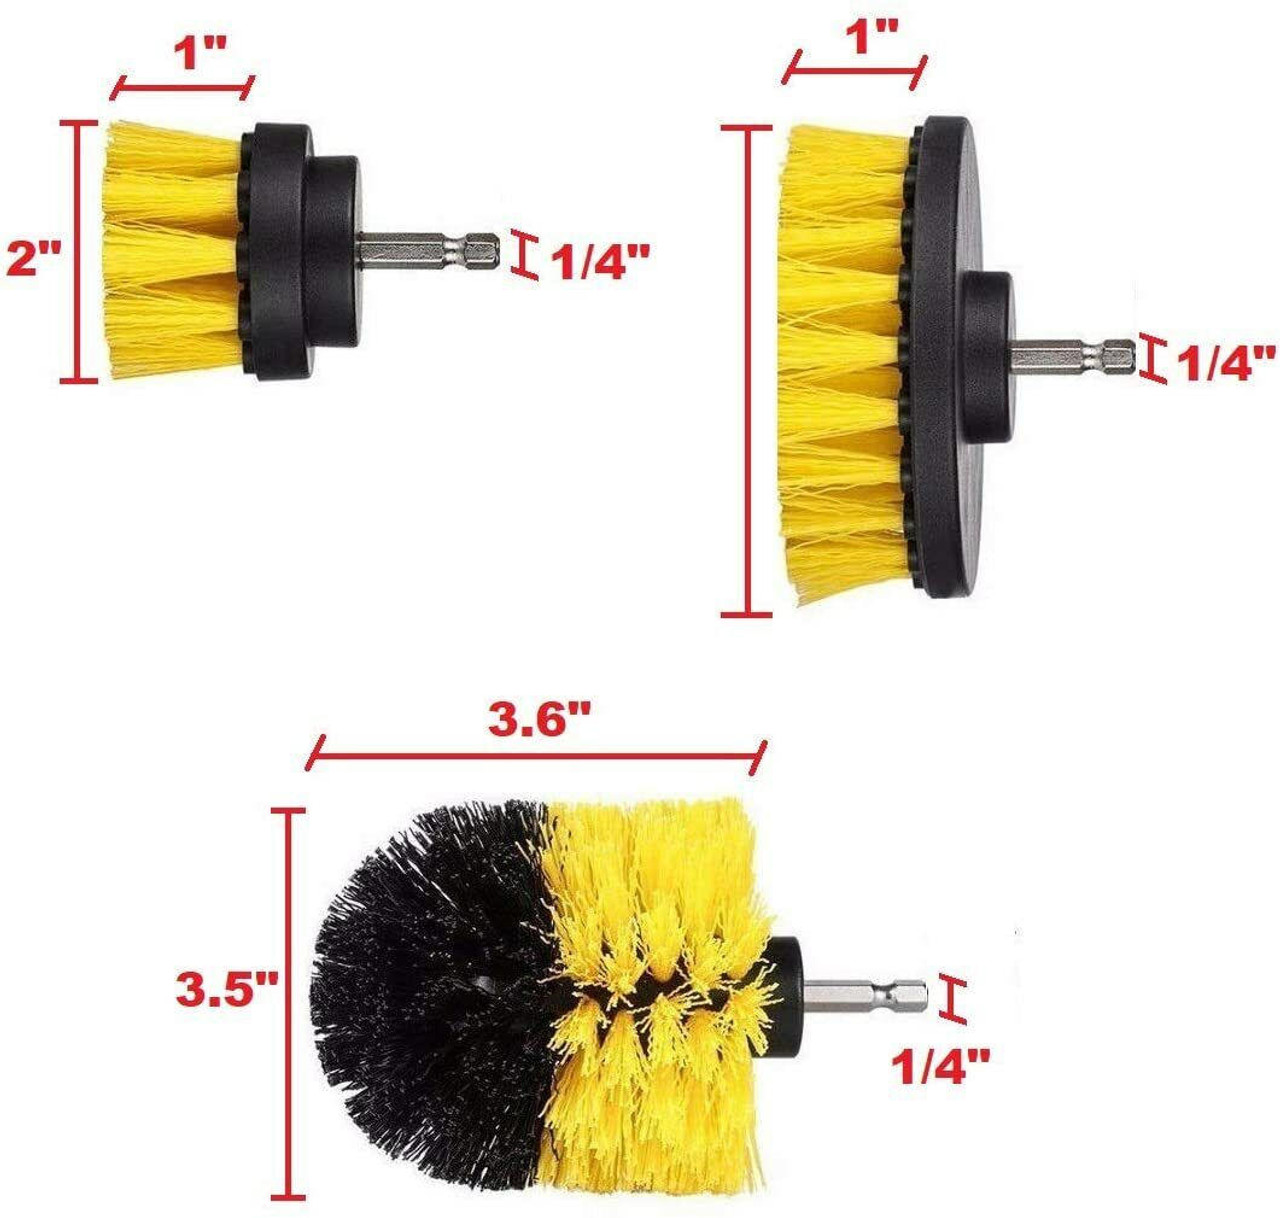 https://cdn11.bigcommerce.com/s-zrh8tkpr8d/images/stencil/1280x1280/products/9946/33085/drill-brush-set-3812-pc-tile-grout-power-scrubber-cleaner-spin-tub-shower-wall__91656.1667769610.jpg?c=2&imbypass=on